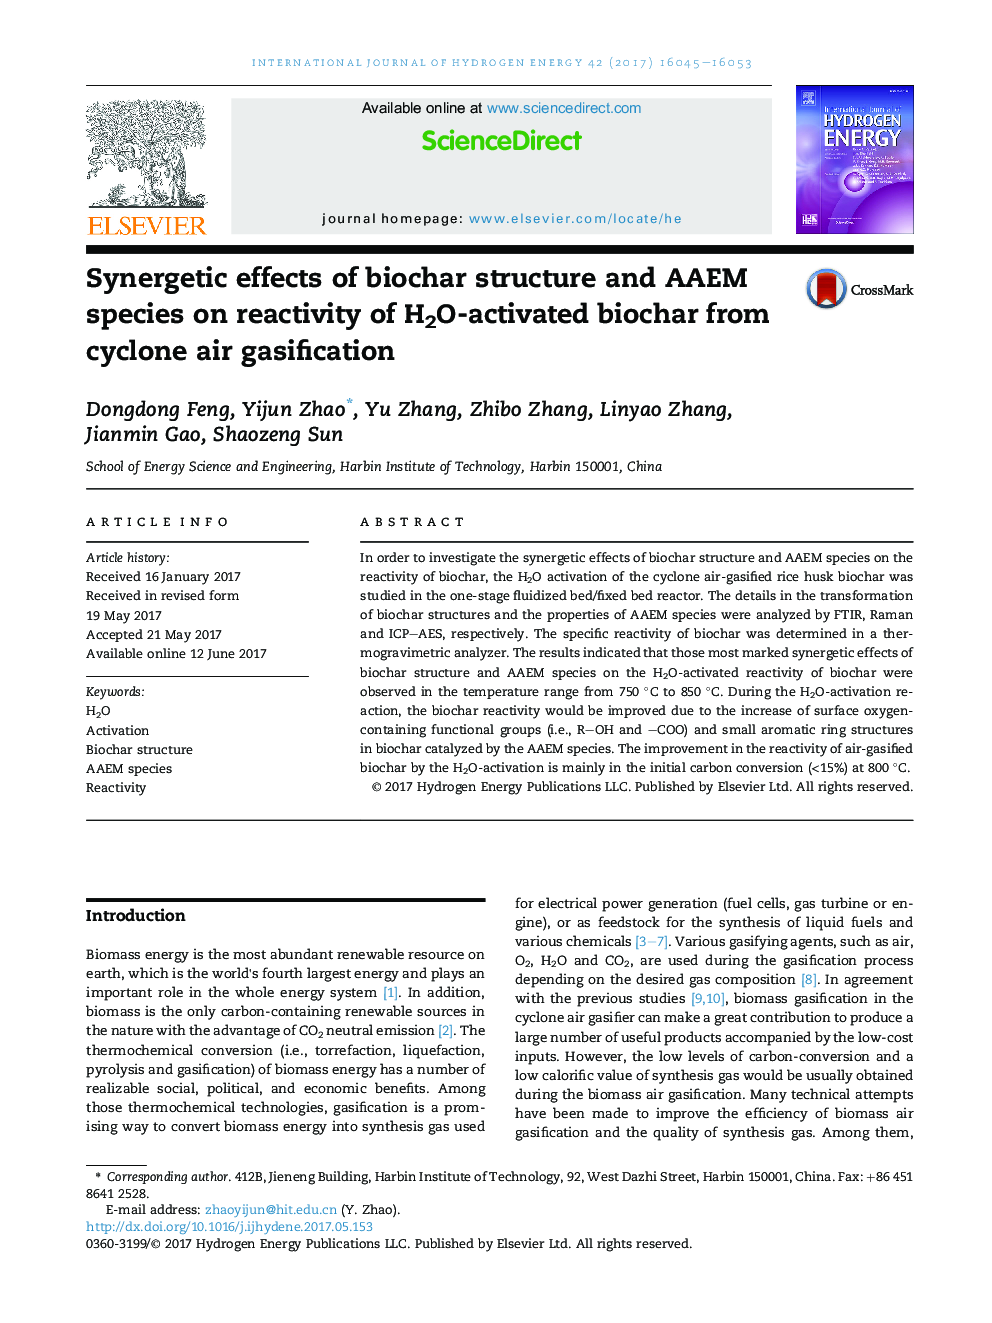 Synergetic effects of biochar structure and AAEM species on reactivity of H2O-activated biochar from cyclone air gasification